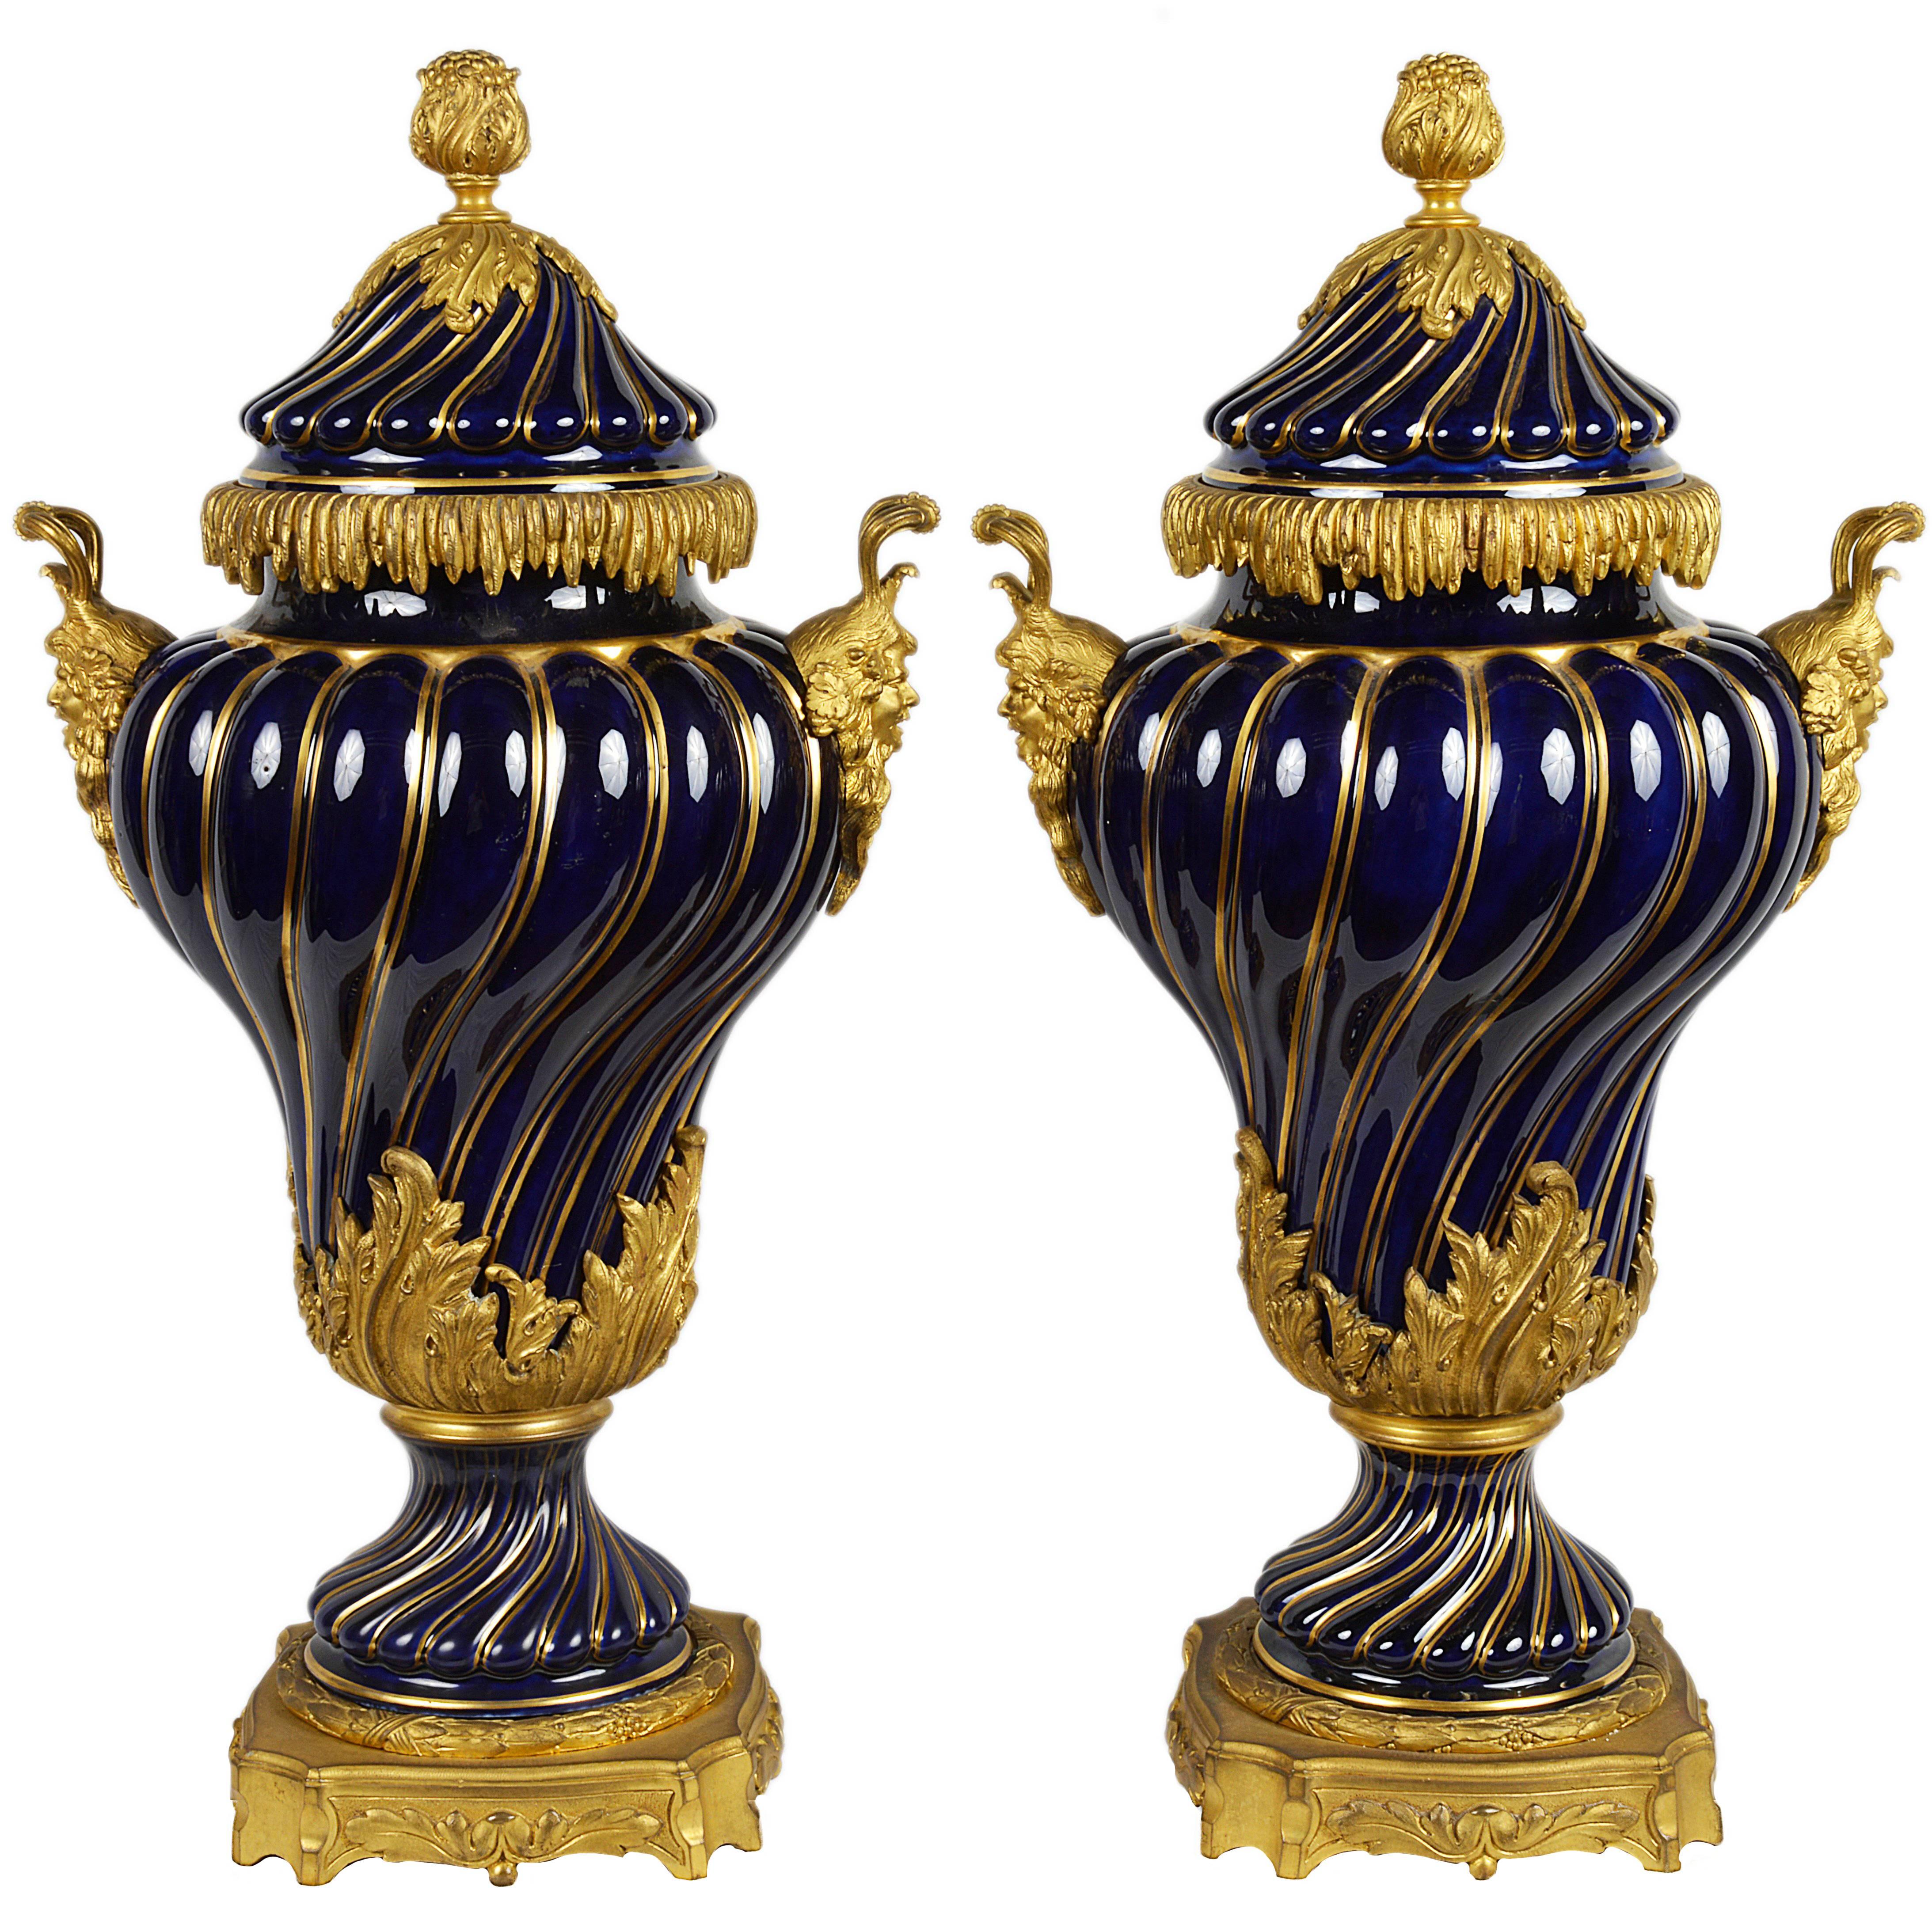 Pair of 19th Century Sevres, Ormolu mounted Vases